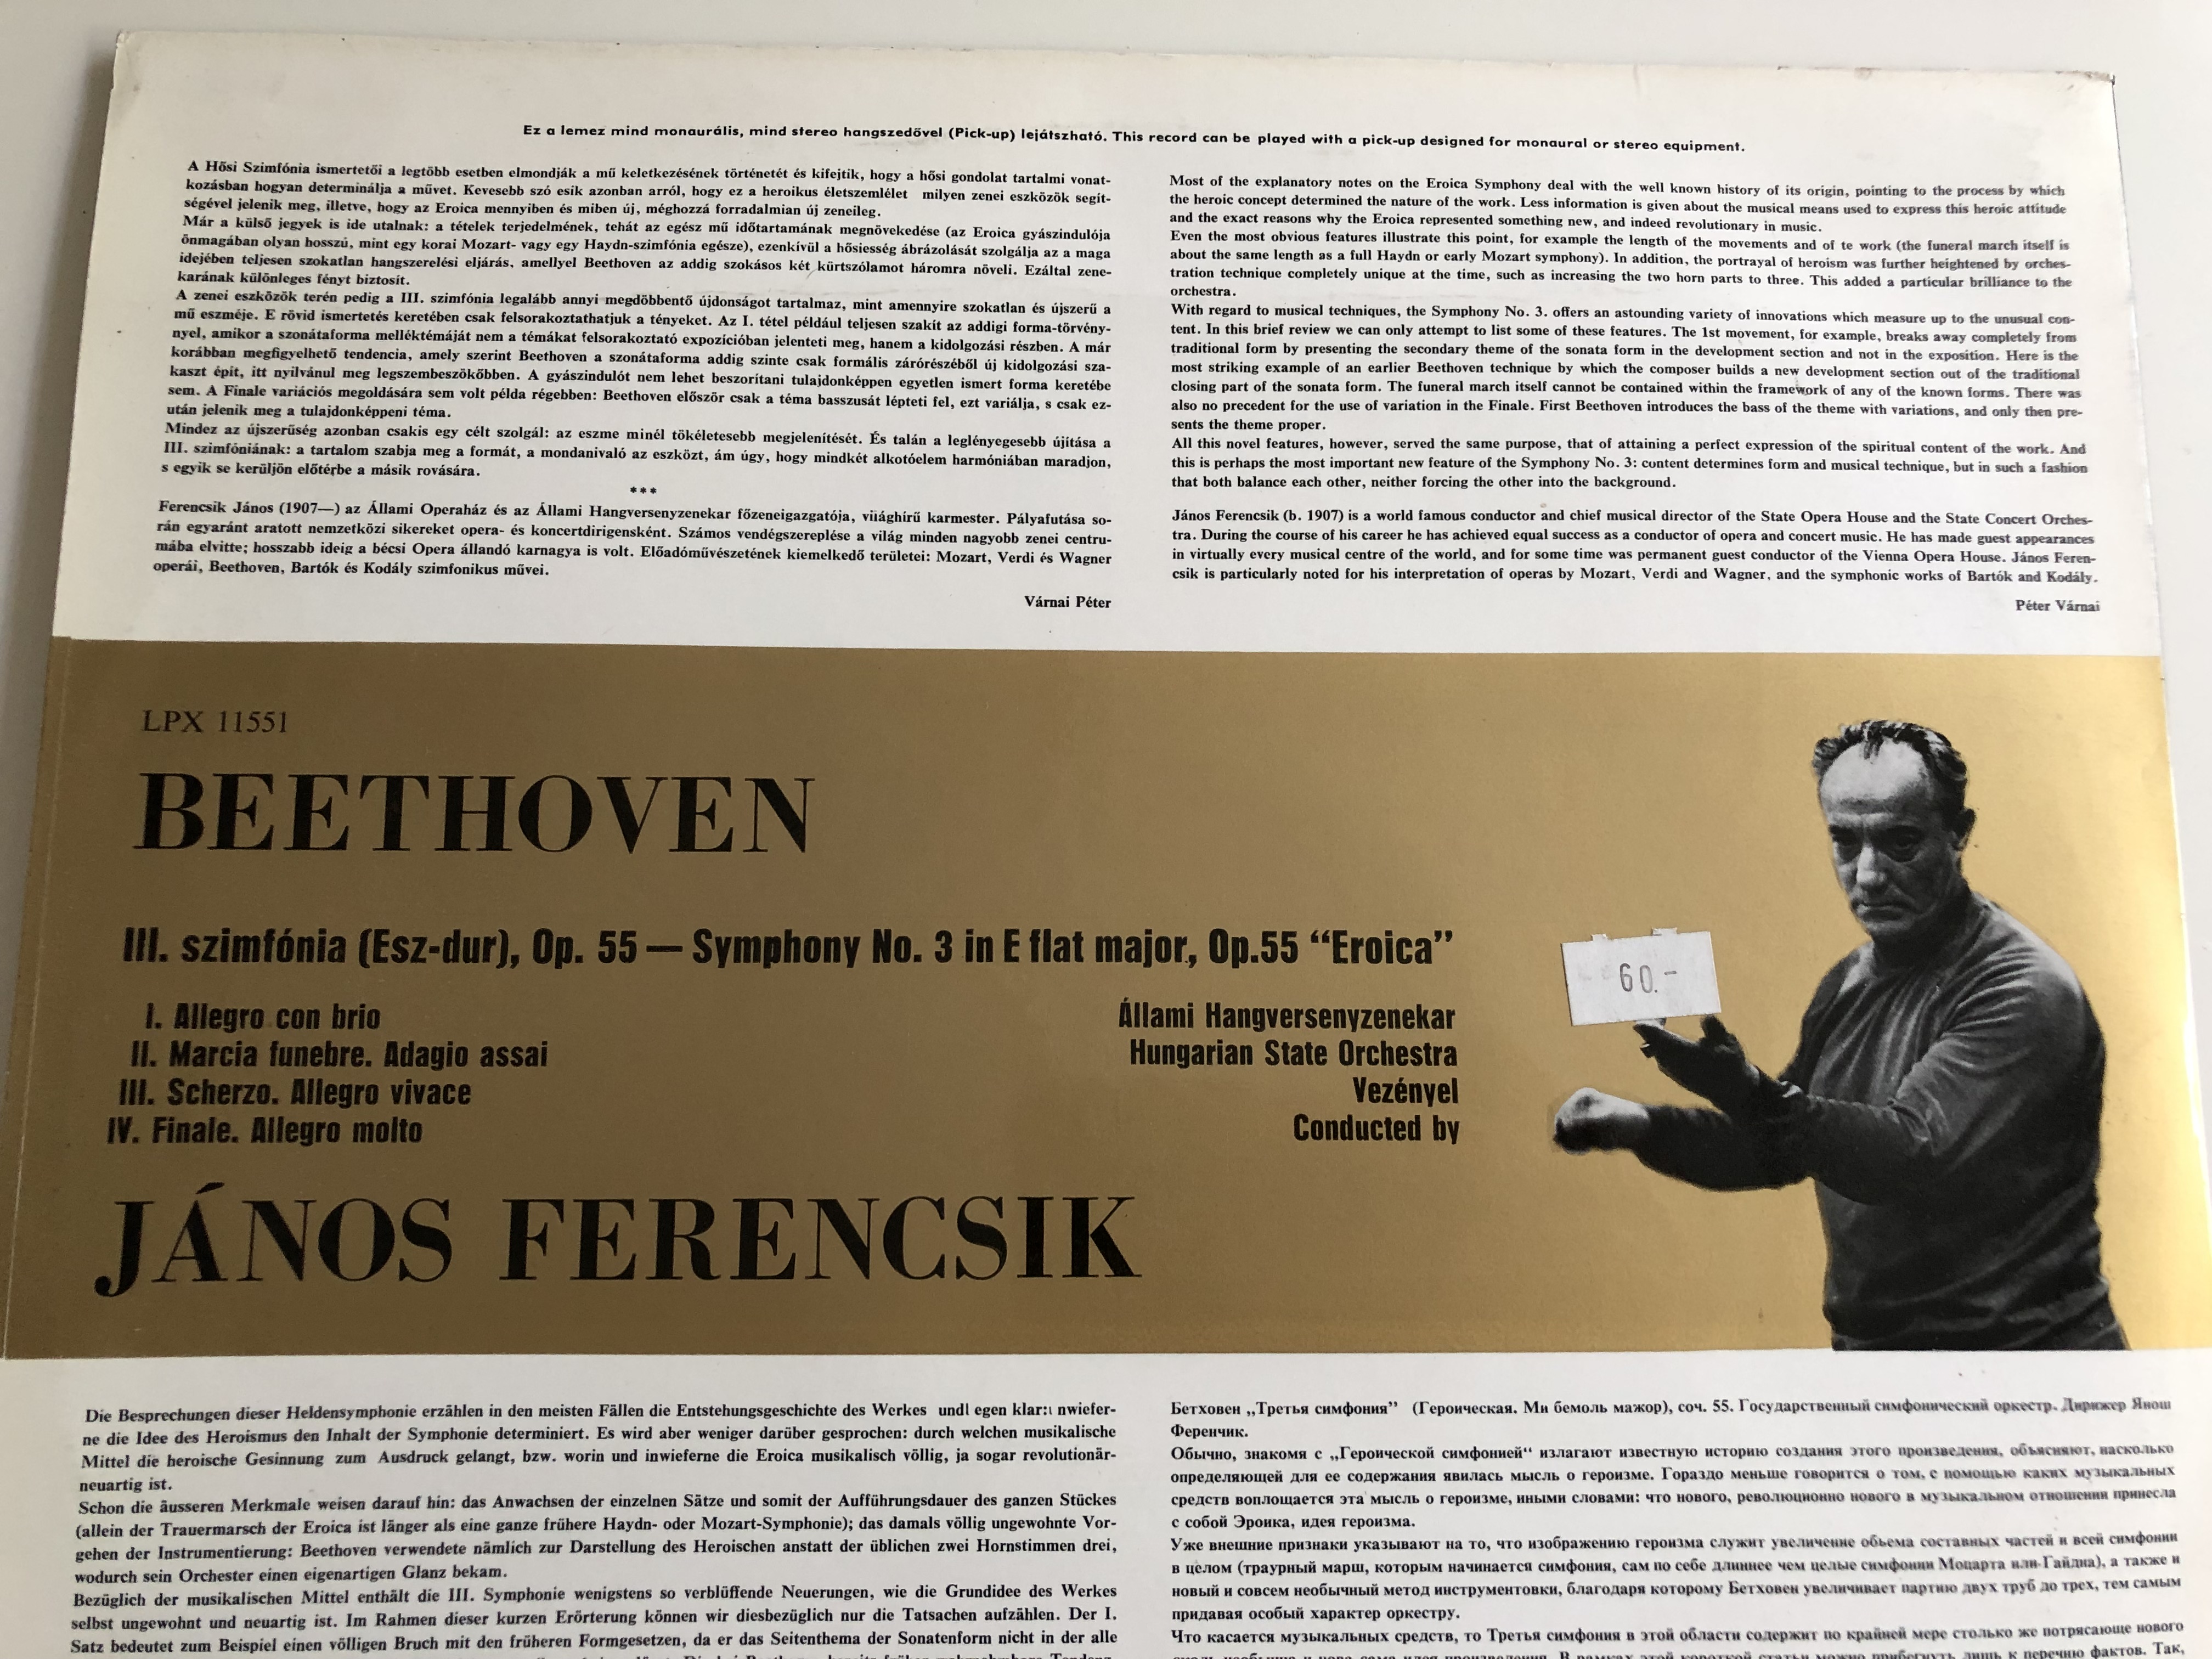 eroica-beethoven-stereo-mono-lp-hungarian-state-orchestra-conducted-by-j-nos-ferencsik-hungaroton-lpx11551-3-.jpg